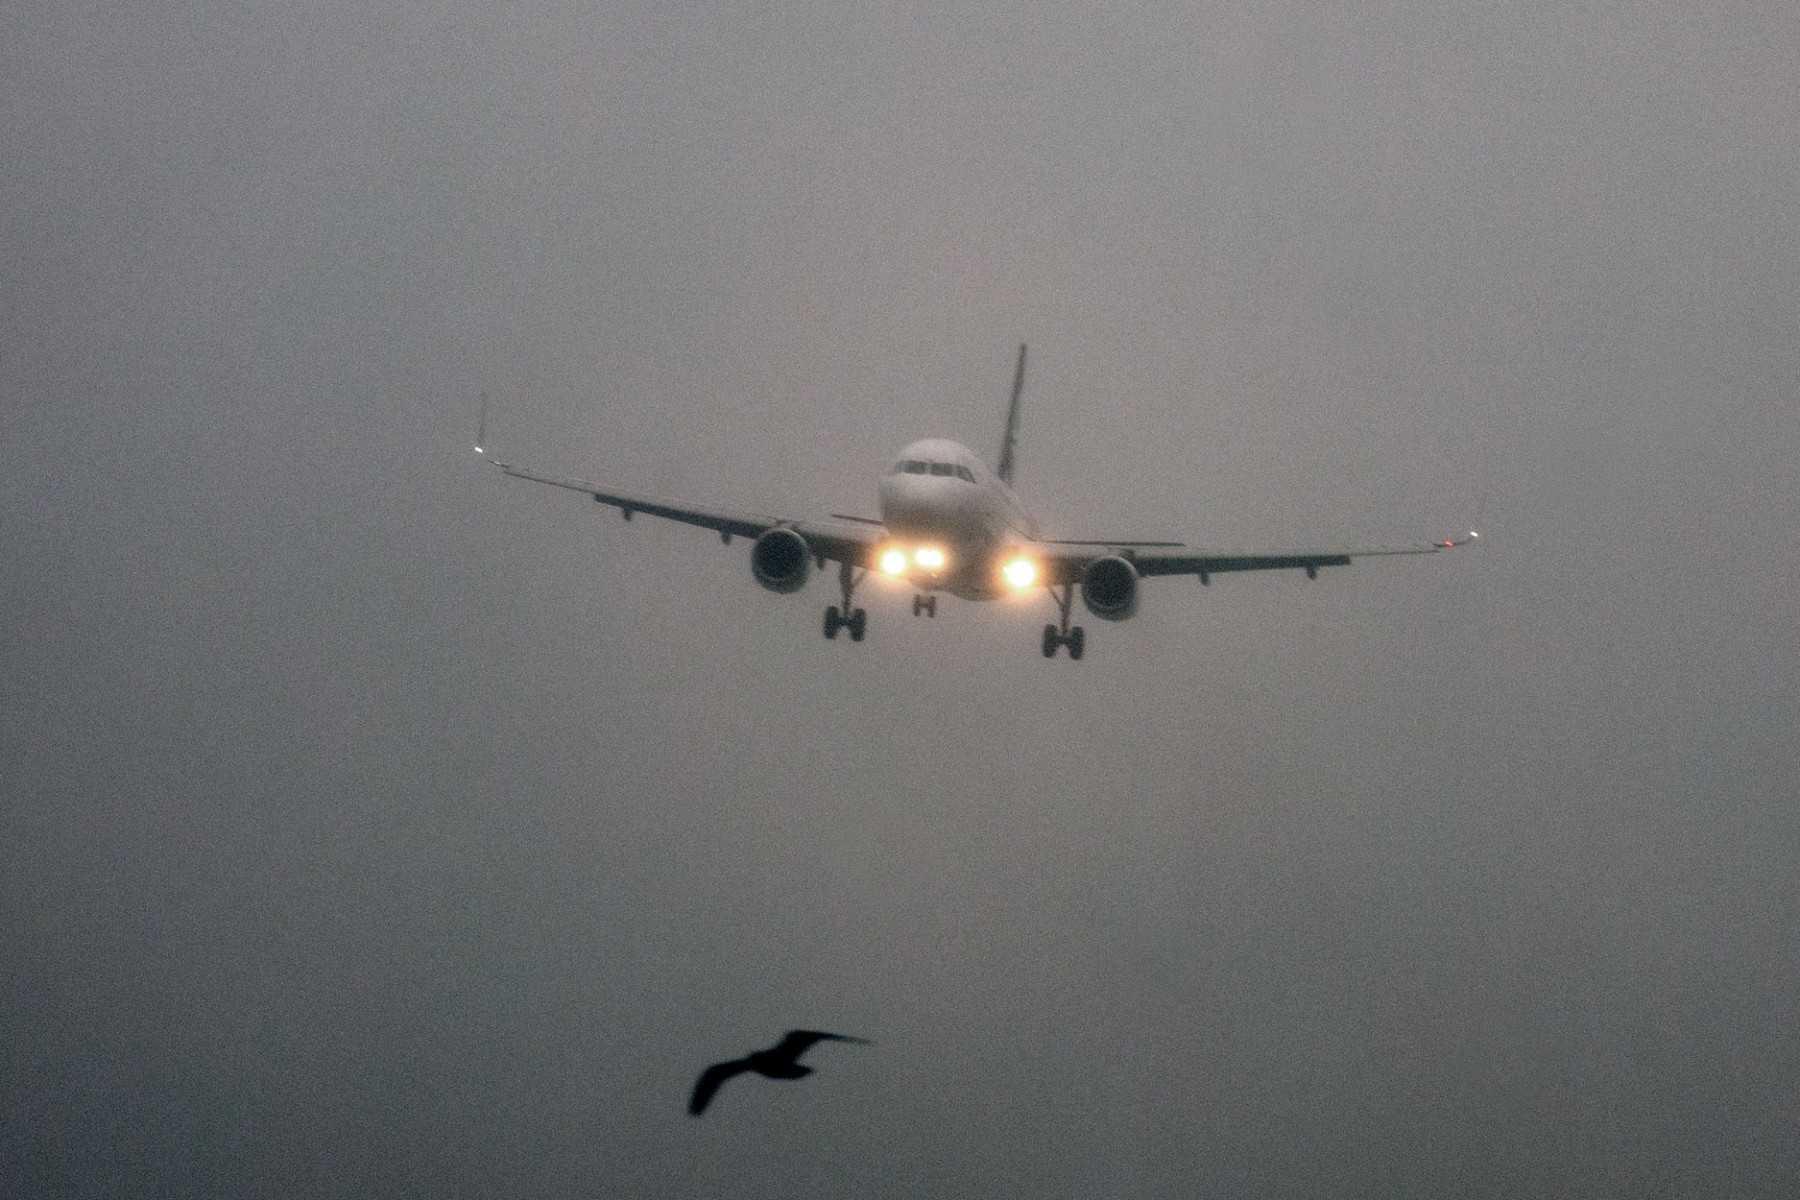 An Air New Zealand A320 aircraft prepares to land amid strong wind and rain during a storm at the airport in Wellington on Aug 8. Photo: AFP